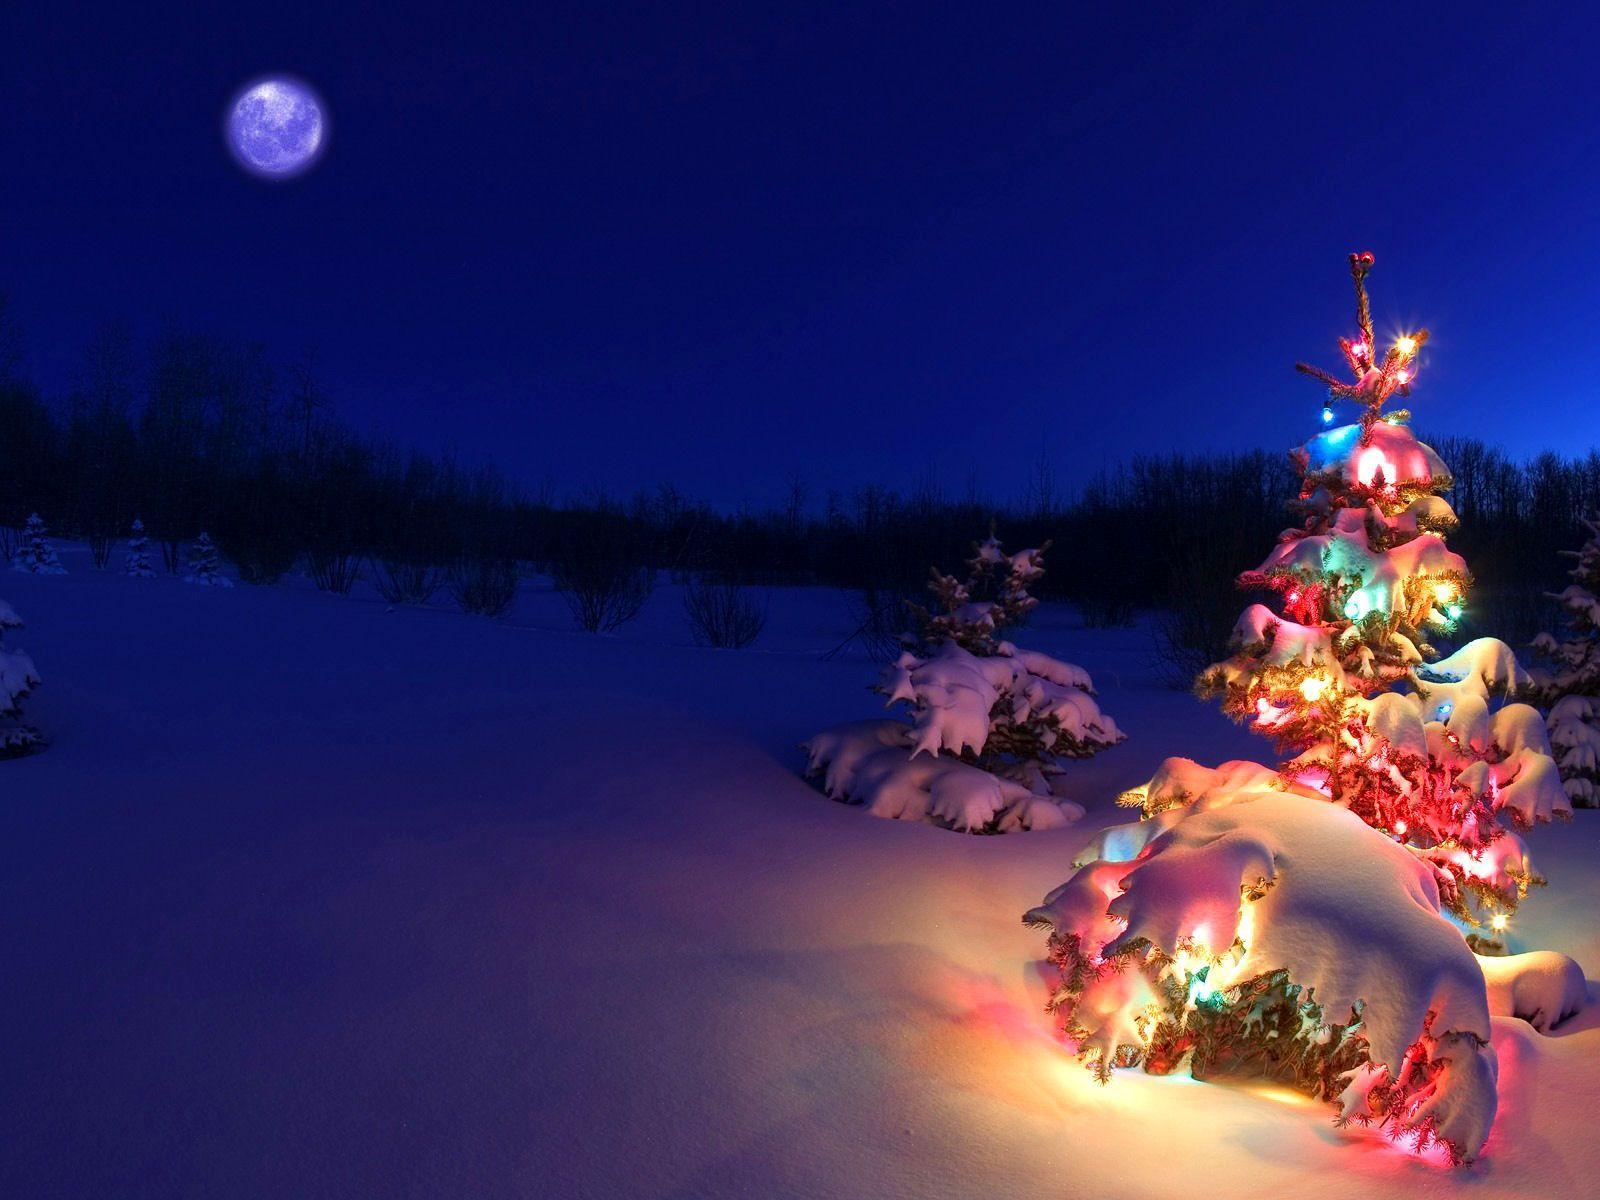 You have snow and a spruce? You have Christmas. Christmas wallpaper hd, Christmas desktop, Christmas desktop wallpaper